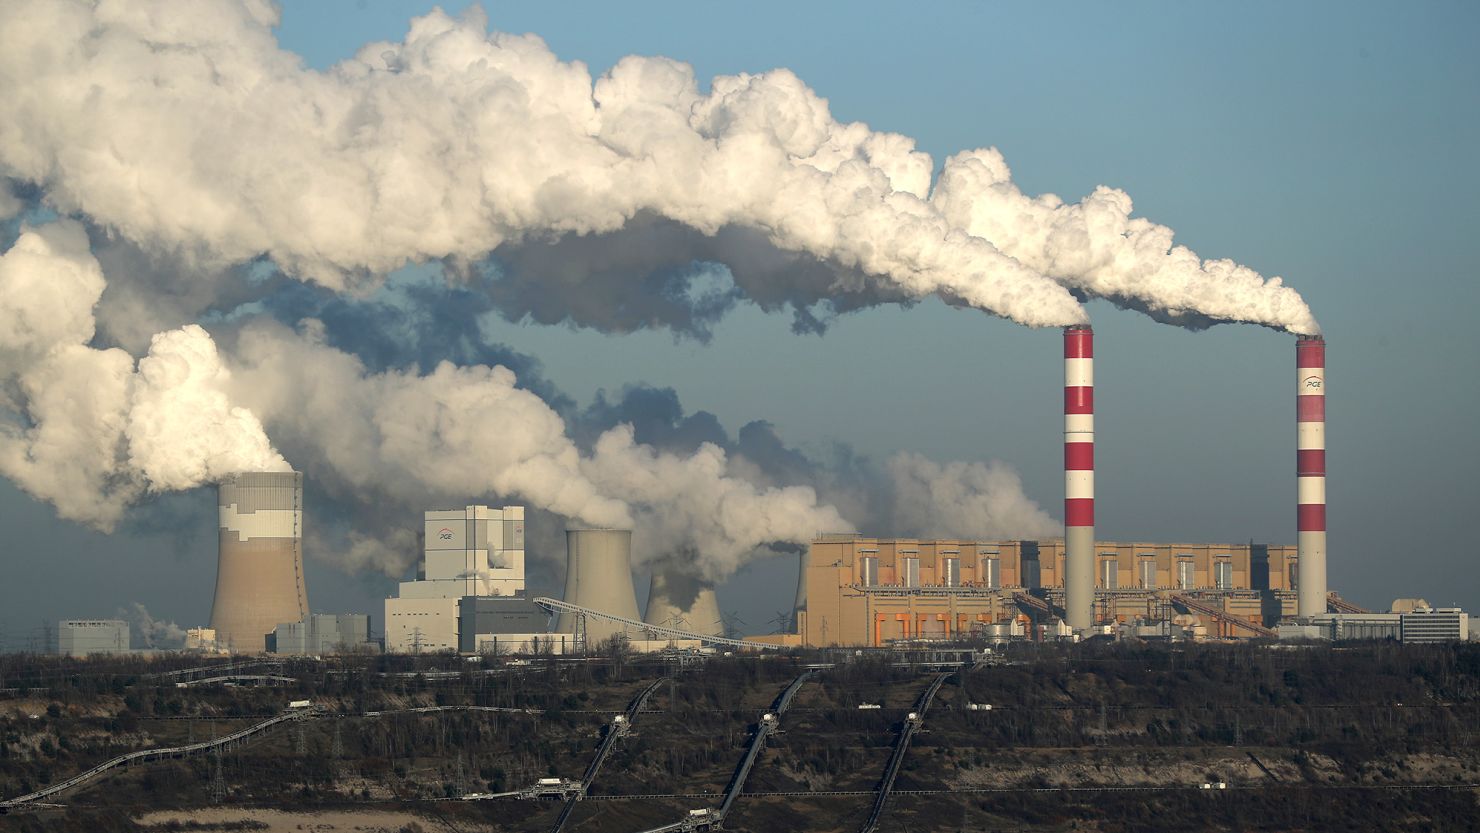 ROGOWIEC, POLAND - NOVEMBER 29: Steam and smoke rise from the Belchatow Power Station as the open-pit coal mine that feeds the station coal lies below on November 29, 2018 in Rogowiec, Poland. The Belchatow station, with an output of 5,472 megawatts, is the world's largest lignite coal-fired power station. The station emits approximately 30 million tonnes of CO2 per year. The United Nations COP 24 climate conference is due to begin on December 2 in nearby Katowice, two hours south of Belchatow.  (Photo by Sean Gallup/Getty Images)